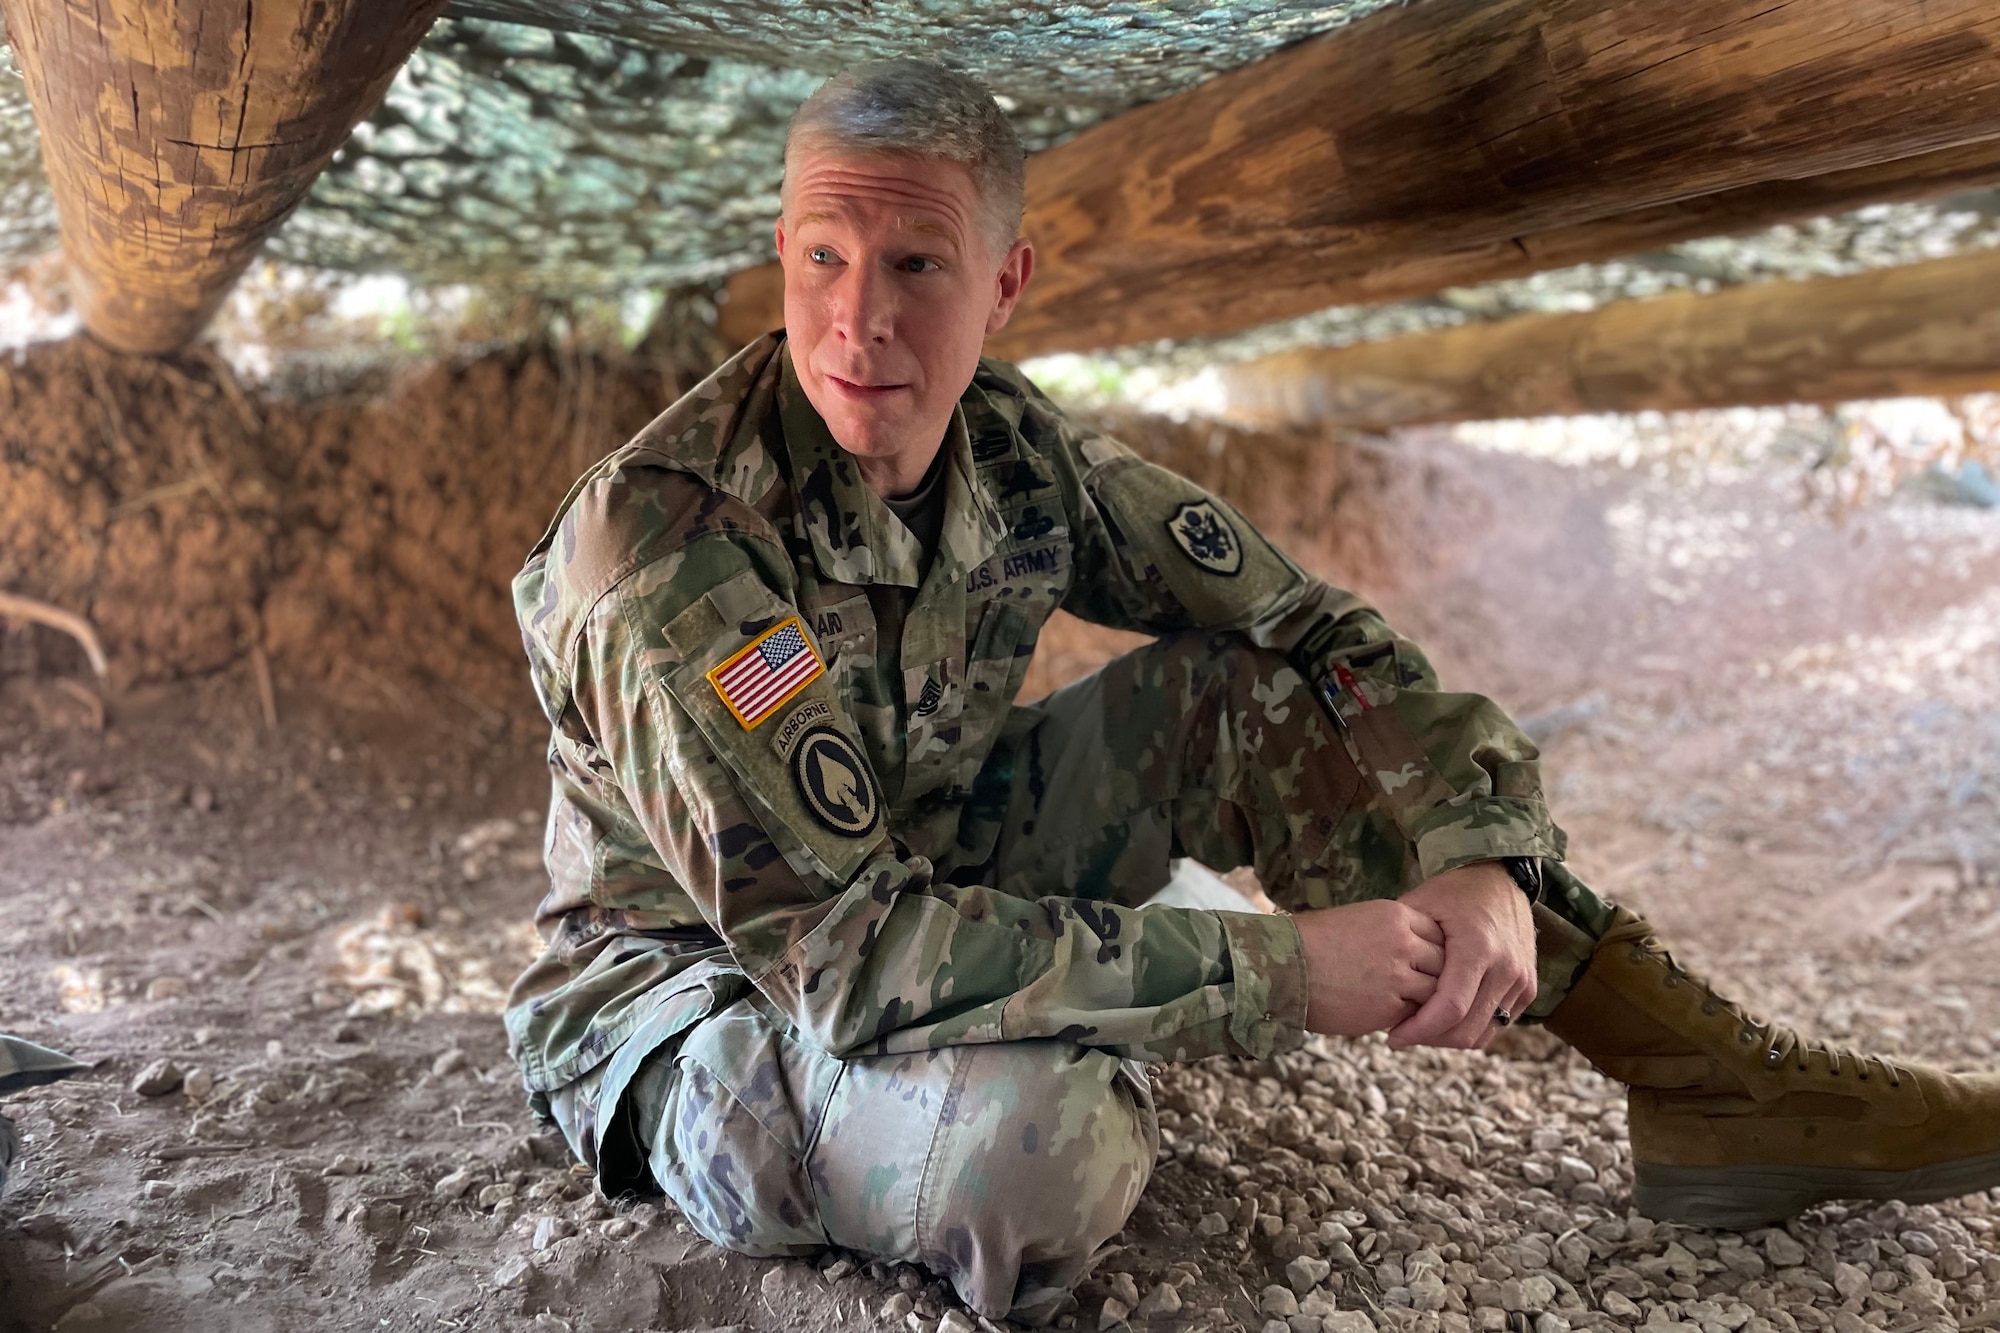 U.S. Army Command Sgt. Maj. Thomas Baird, National Geospatial-intelligence Agency command senior enlisted leader, crawled into a training foxhole to meet 344th Military Intelligence Battalion students who were participating in their capstone assessment at Forward Operating Base Sentinel, Goodfellow Air Force Base, Texas, May 12, 2022. Baird gauged the training environment by asking the students questions. (U.S. Air Force photo by Senior Airman Abbey Rieves)